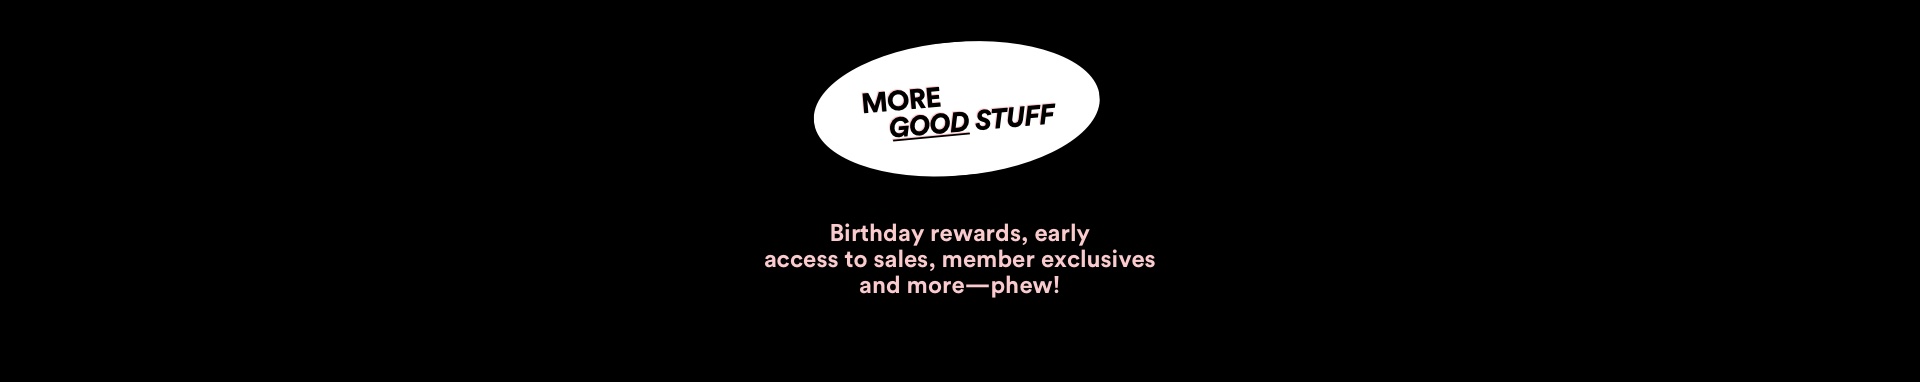 More good stuff: birthday rewards, sale early access and more.